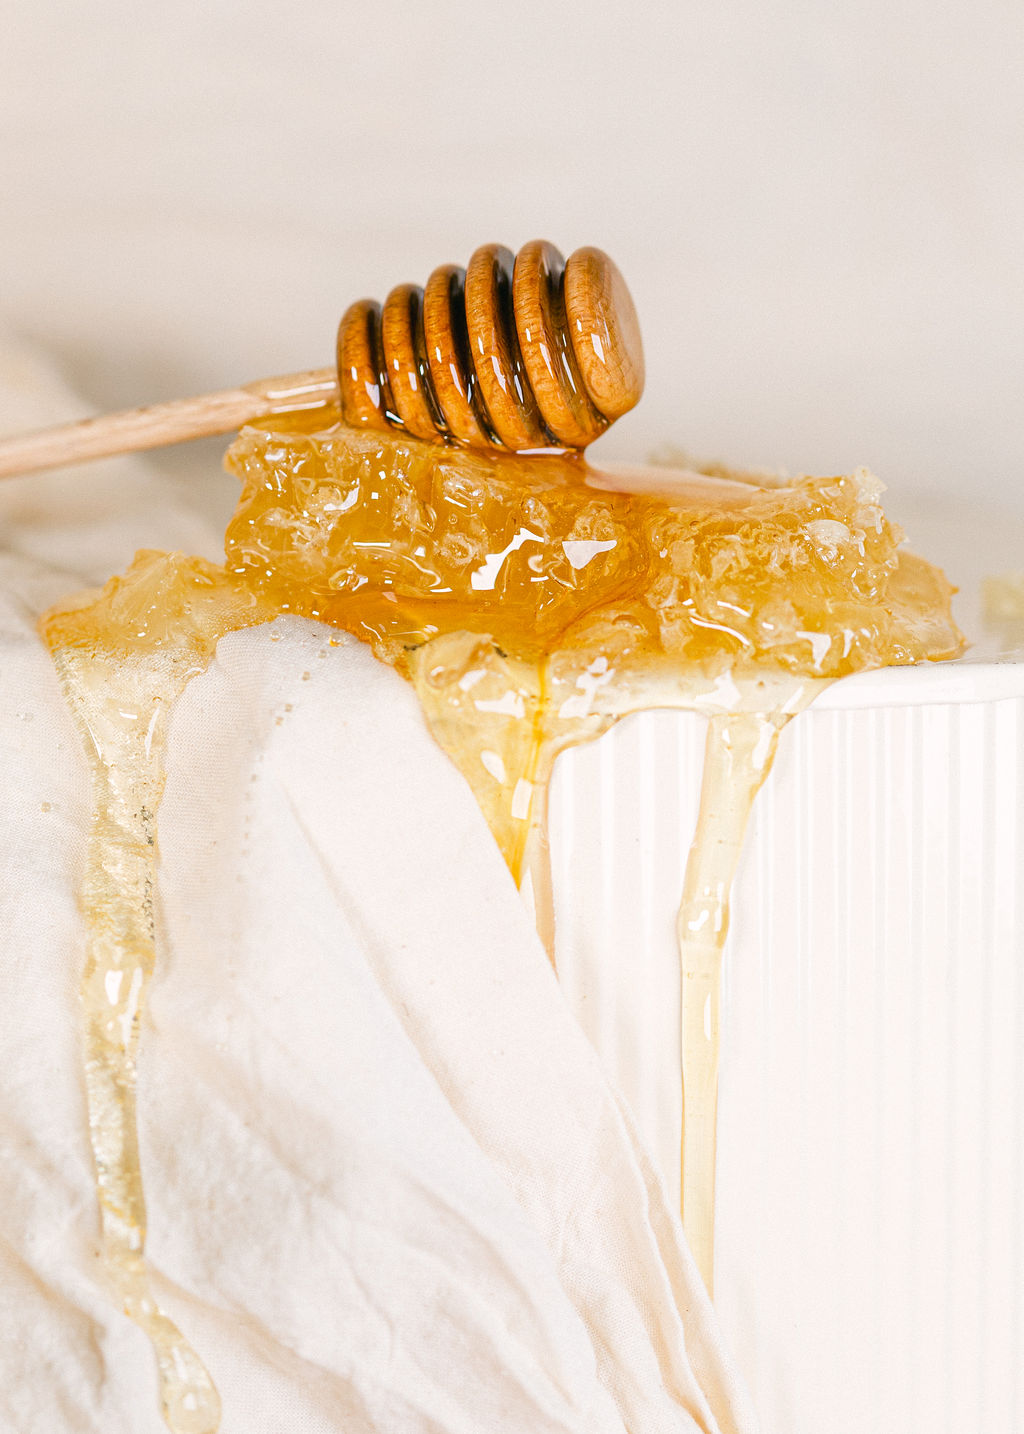 Honey drizzle product photography Food photographer Chelsea Loren san diego